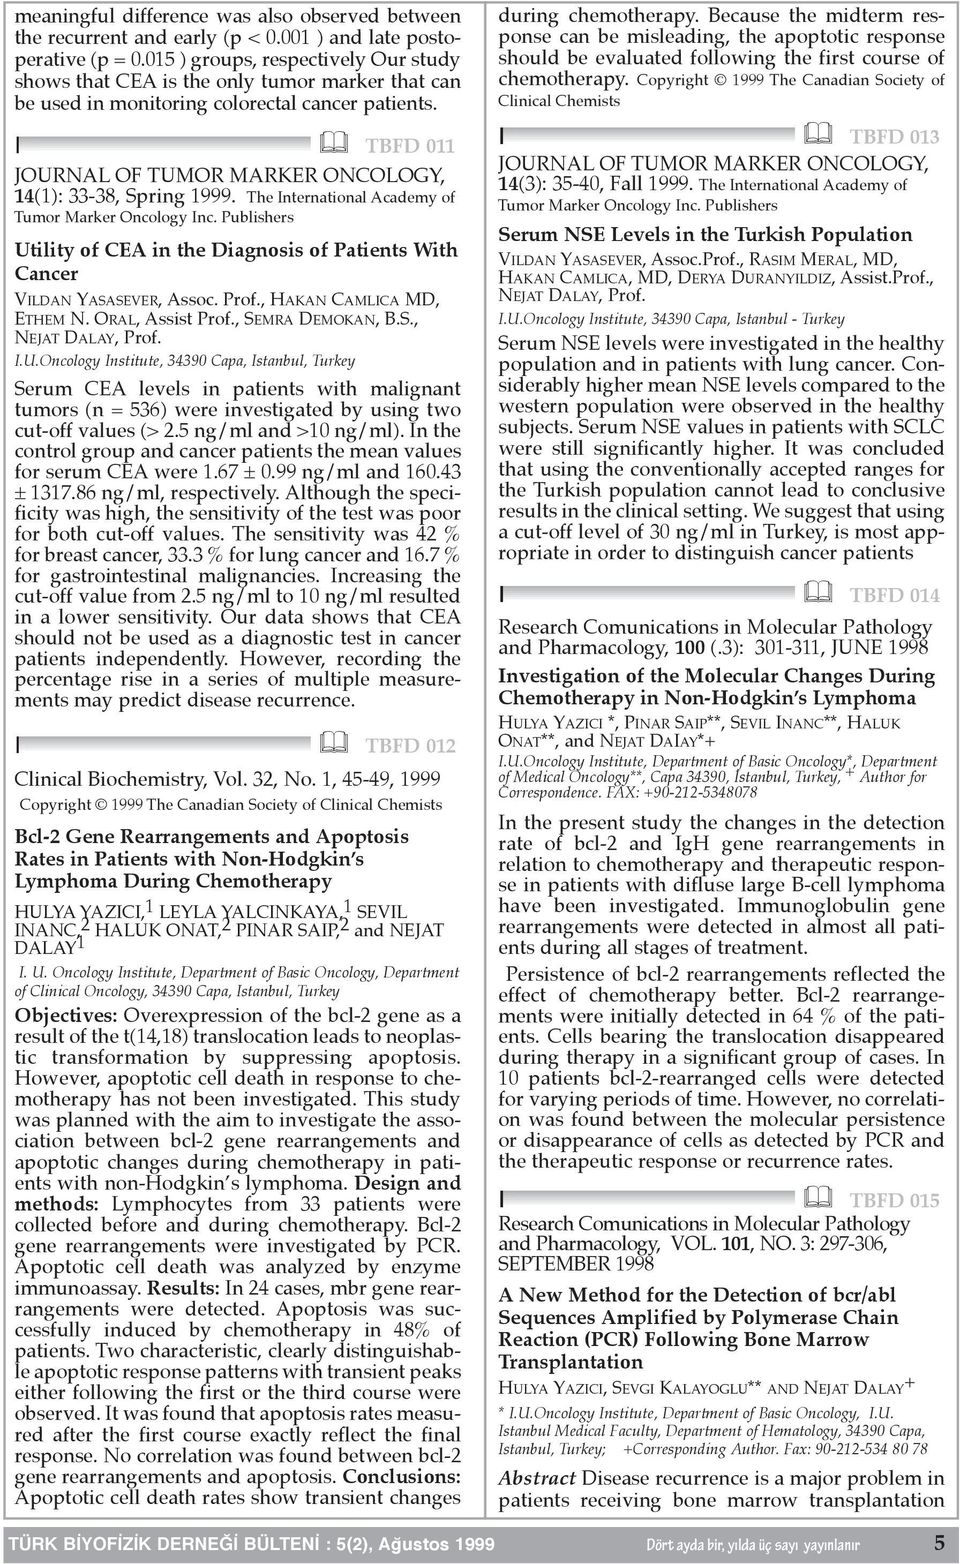 & TBFD 011 JOURNAL OF TUMOR MARKER ONCOLOGY, 14(1): 33-38, Spring 1999. The International Academy of Tumor Marker Oncology Inc.